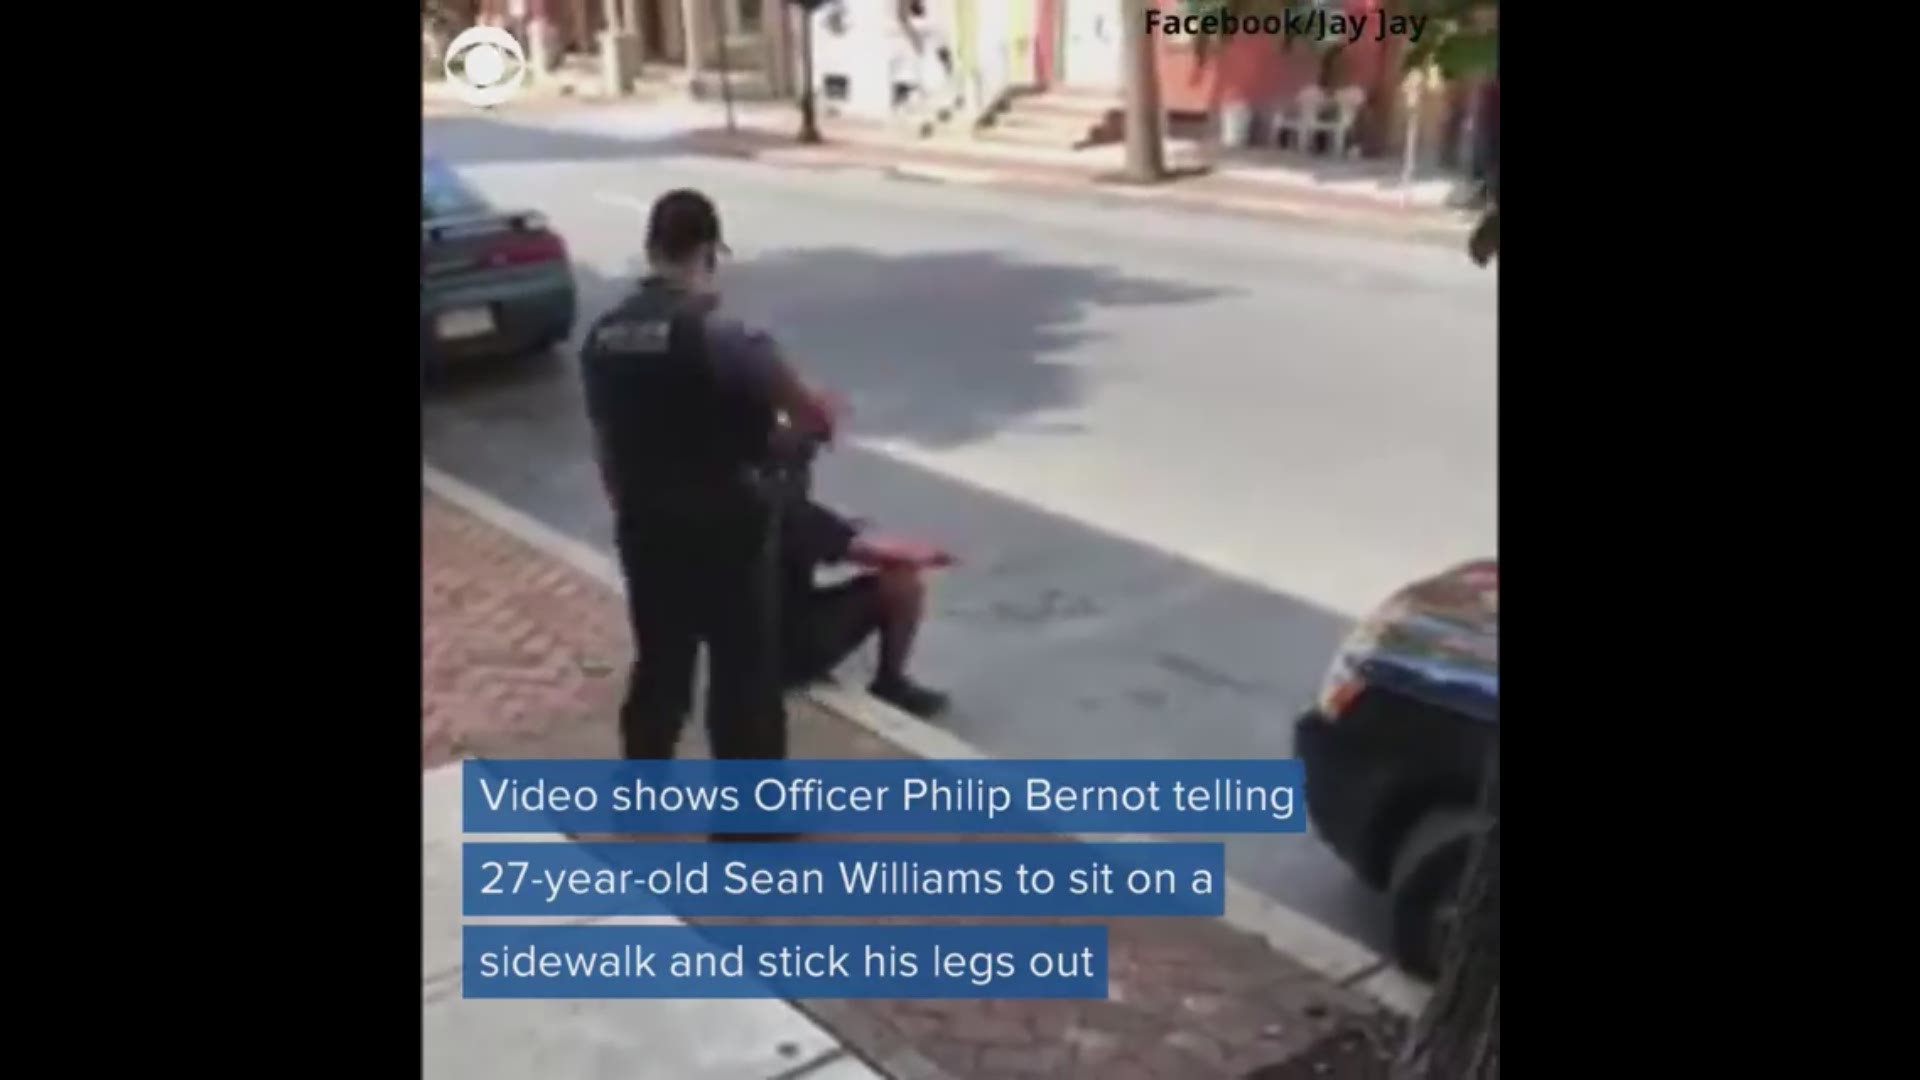 A Pennsylvania police officer is seen on video using a stun gun on a man as he's sitting on a curb. Police said Officer Bernot warned Williams that if he continued to refuse commands, the Taser would be used on him, according to Lancaster Online